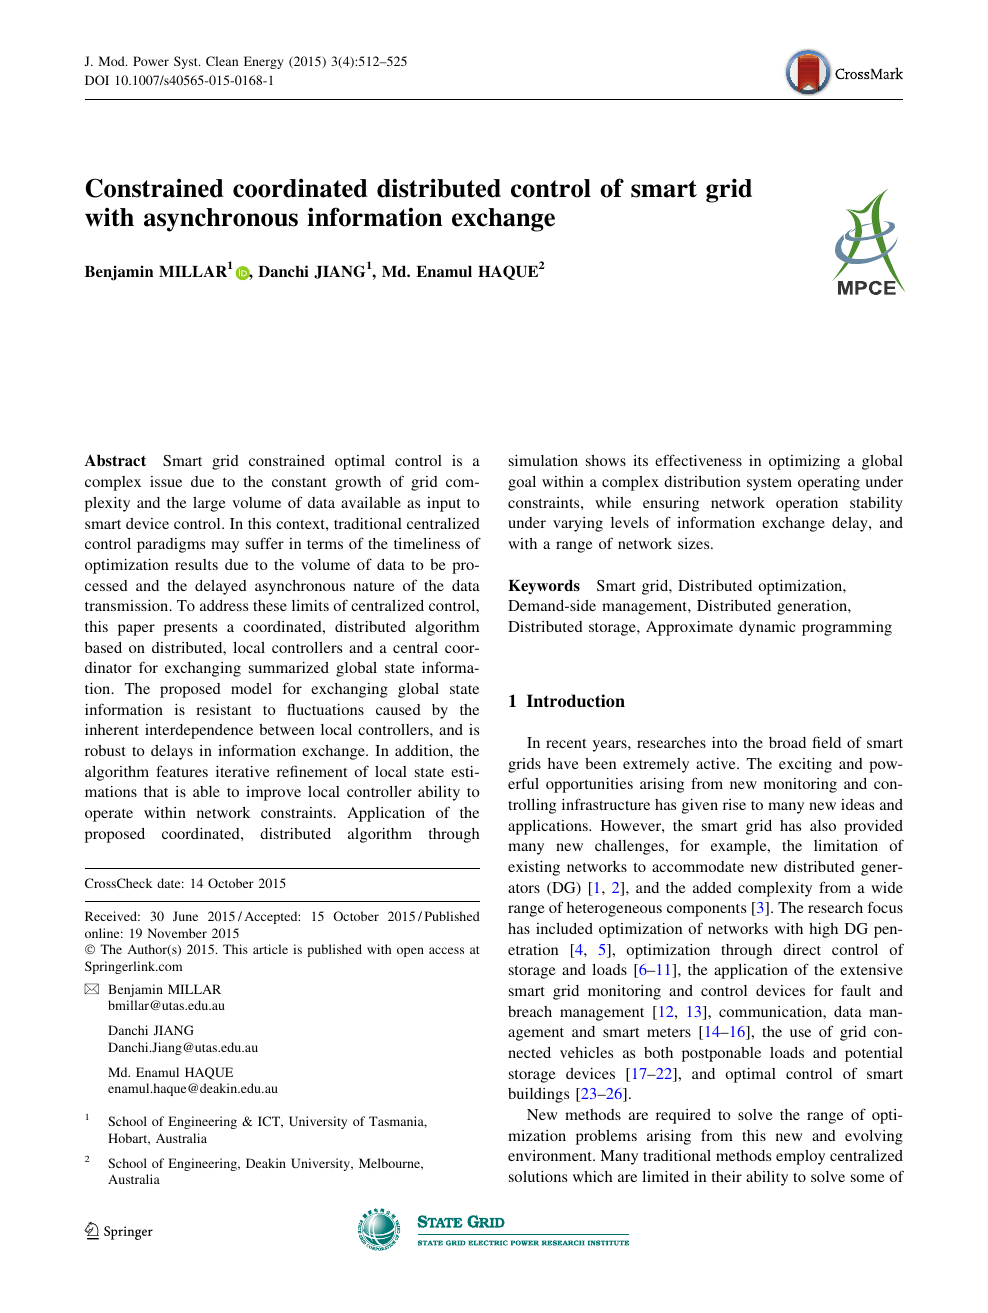 Constrained Coordinated Distributed Control Of Smart Grid With Asynchronous Information Exchange Topic Of Research Paper In Electrical Engineering Electronic Engineering Information Engineering Download Scholarly Article Pdf And Read For Free On